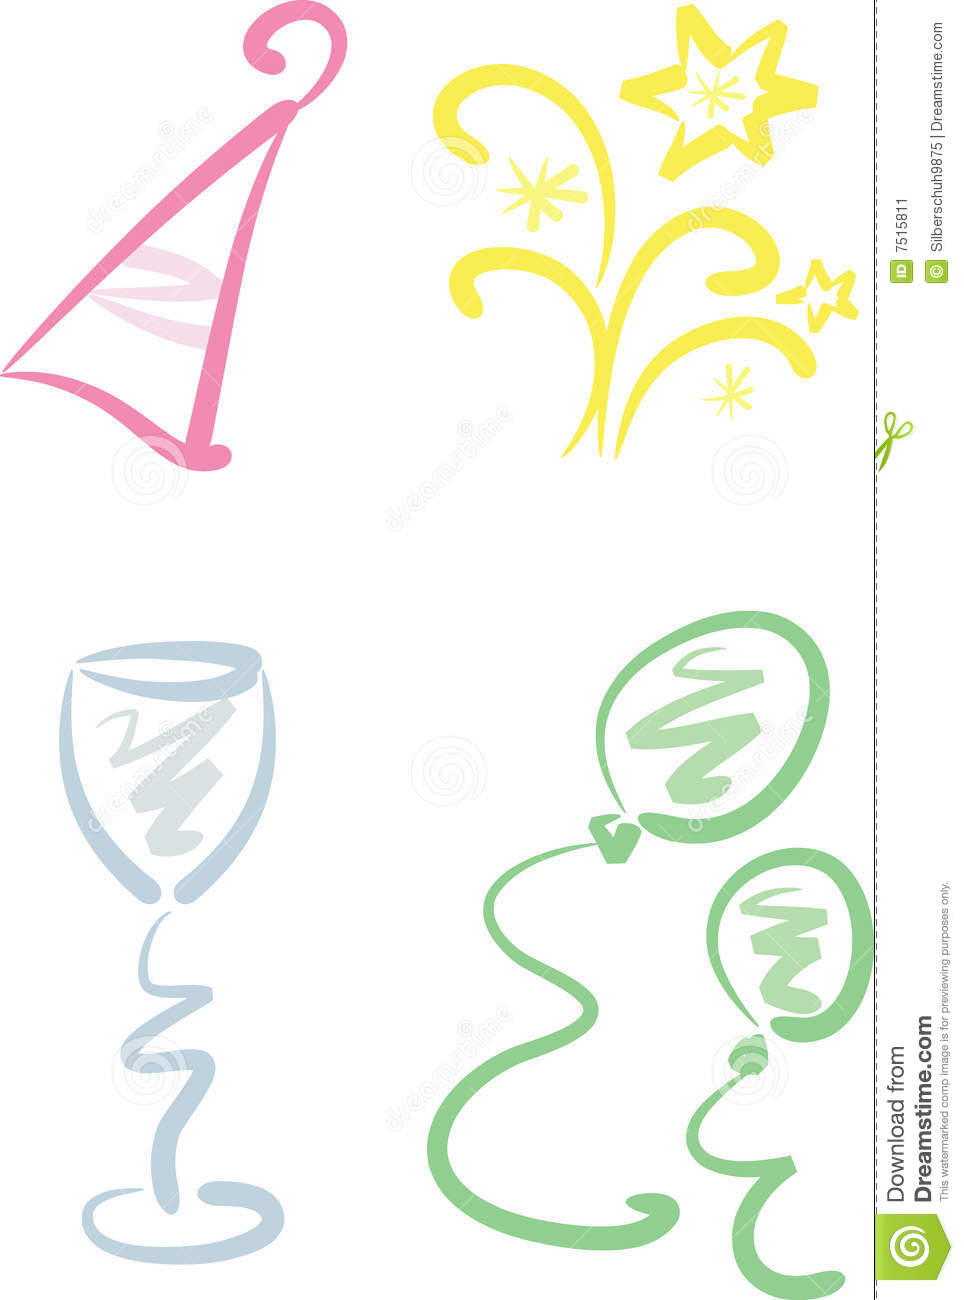 New Years Images Clip Art New Years Fireworks Clipart Viewing Gallery